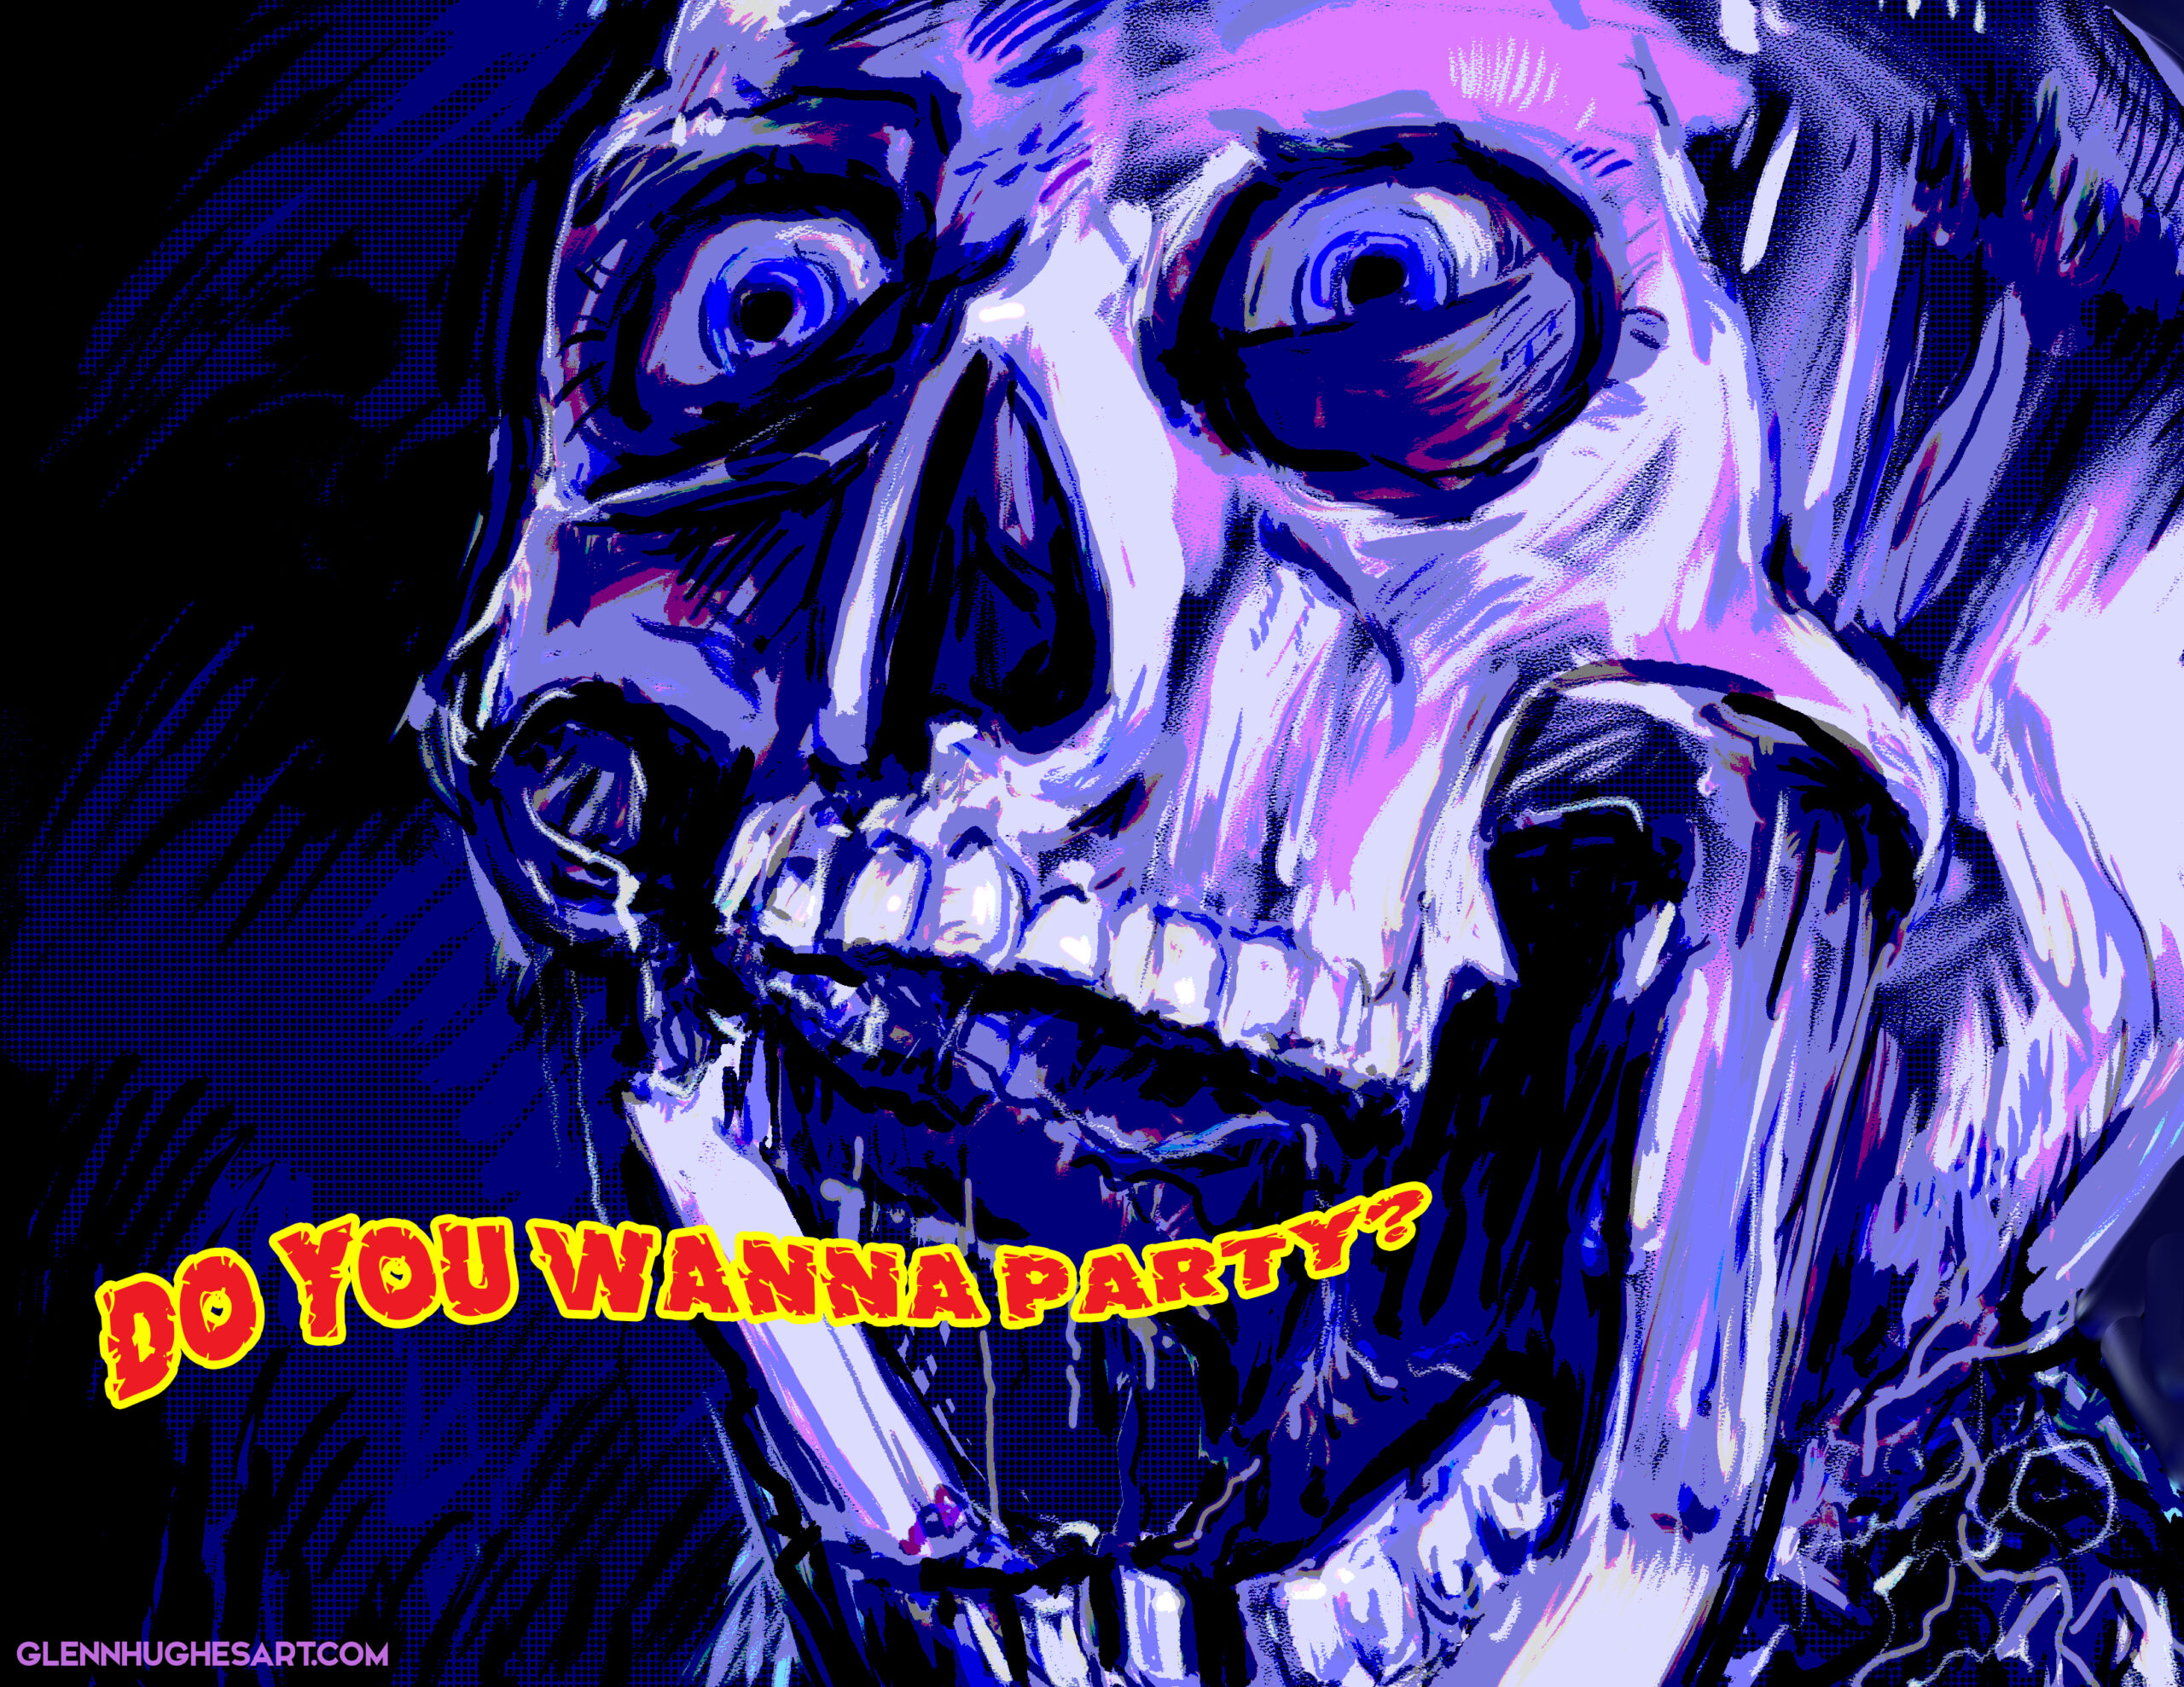 Return Of The Living Dead - Wanna Party